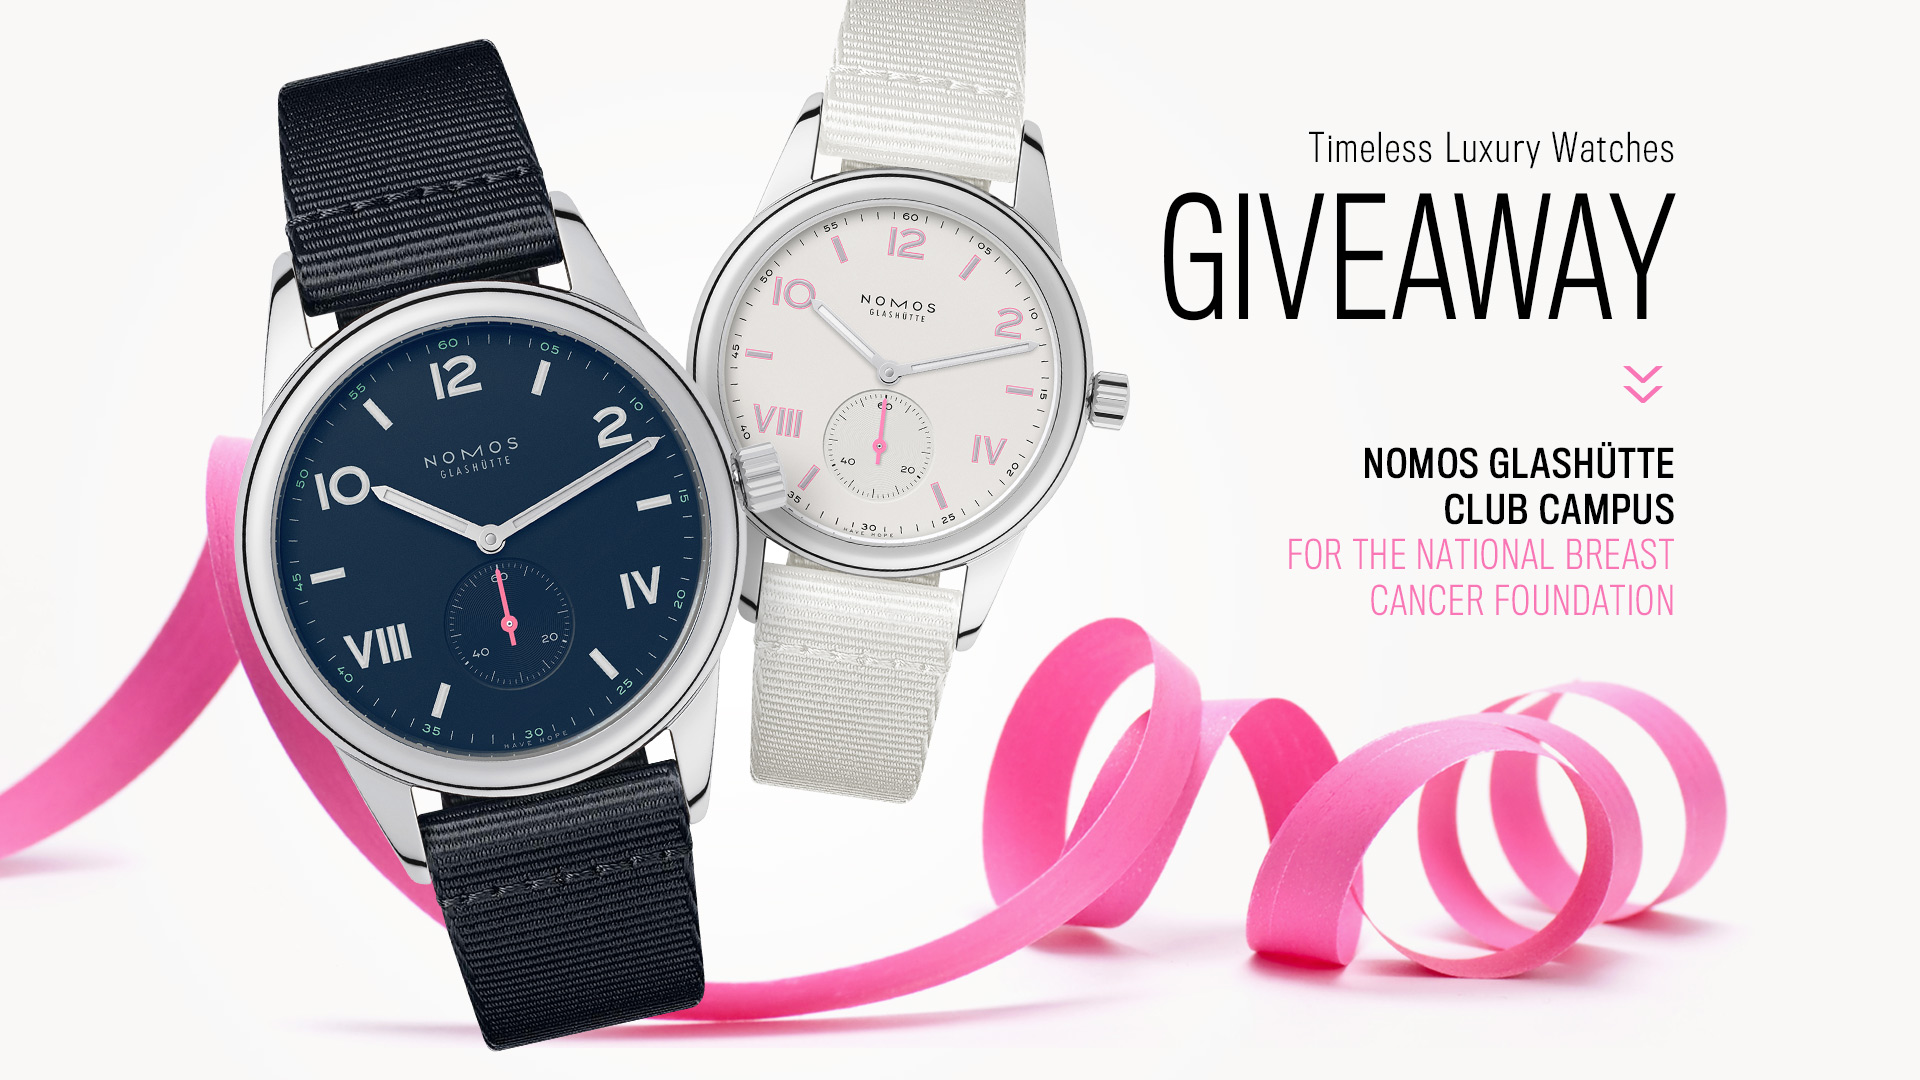 Winner Announced: Timeless Luxury Watches NBCF Nomos Club Campus His & Hers Pair